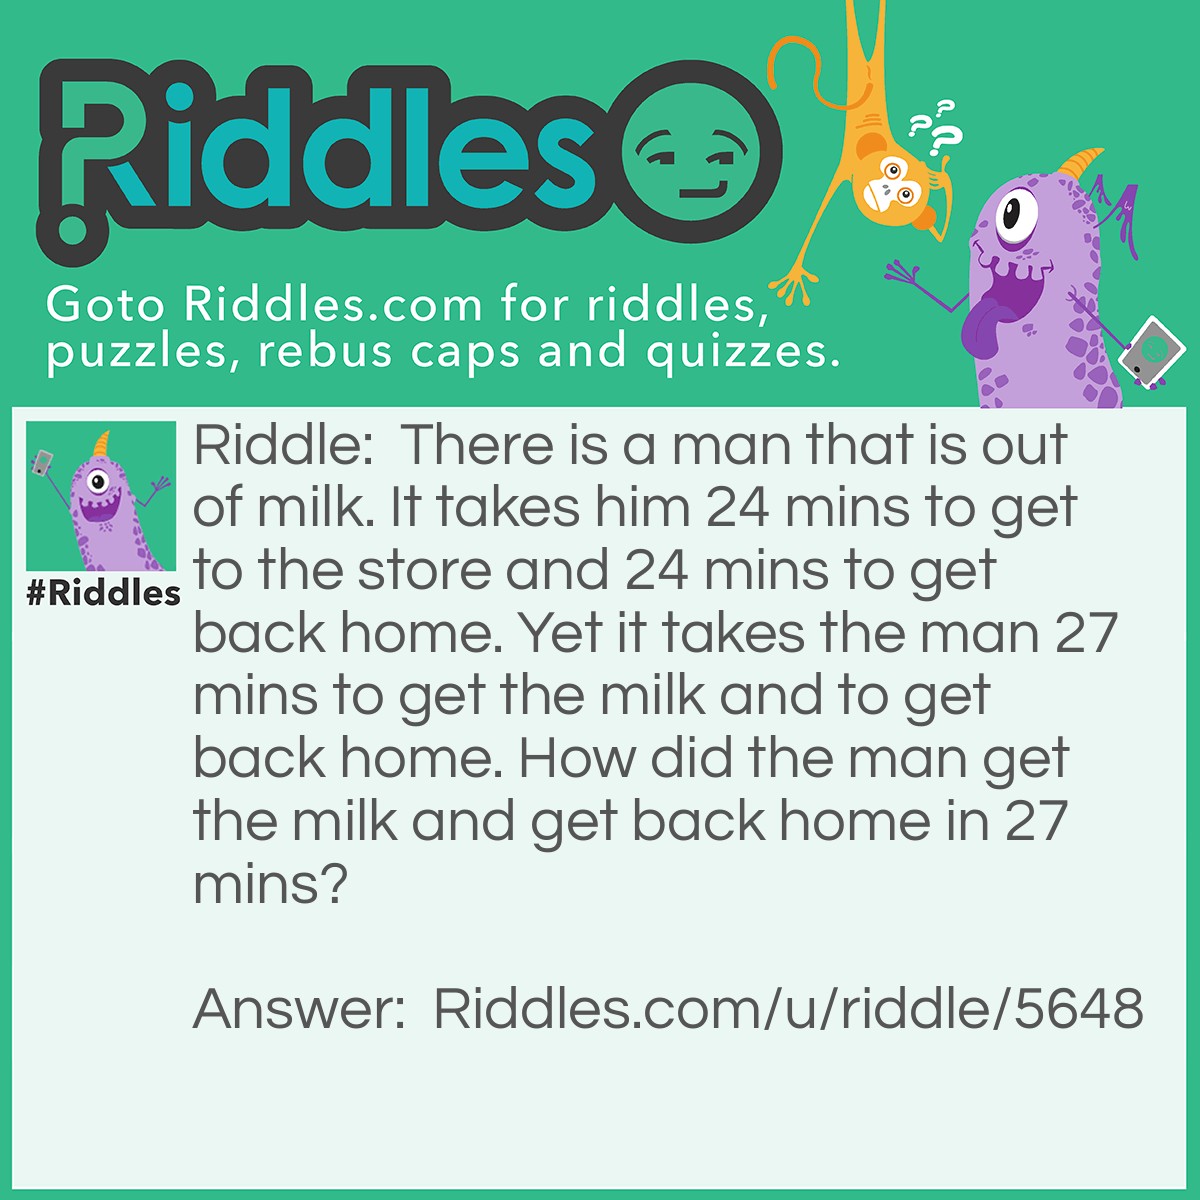 Riddle: There is a man that is out of milk. It takes him 24 mins to get to the store and 24 mins to get back home. Yet it takes the man 27 mins to get the milk and to get back home. How did the man get the milk and get back home in 27 mins? Answer: The man was already at the store so it took him 3 mins to get the milk and 24 mins to get back home.